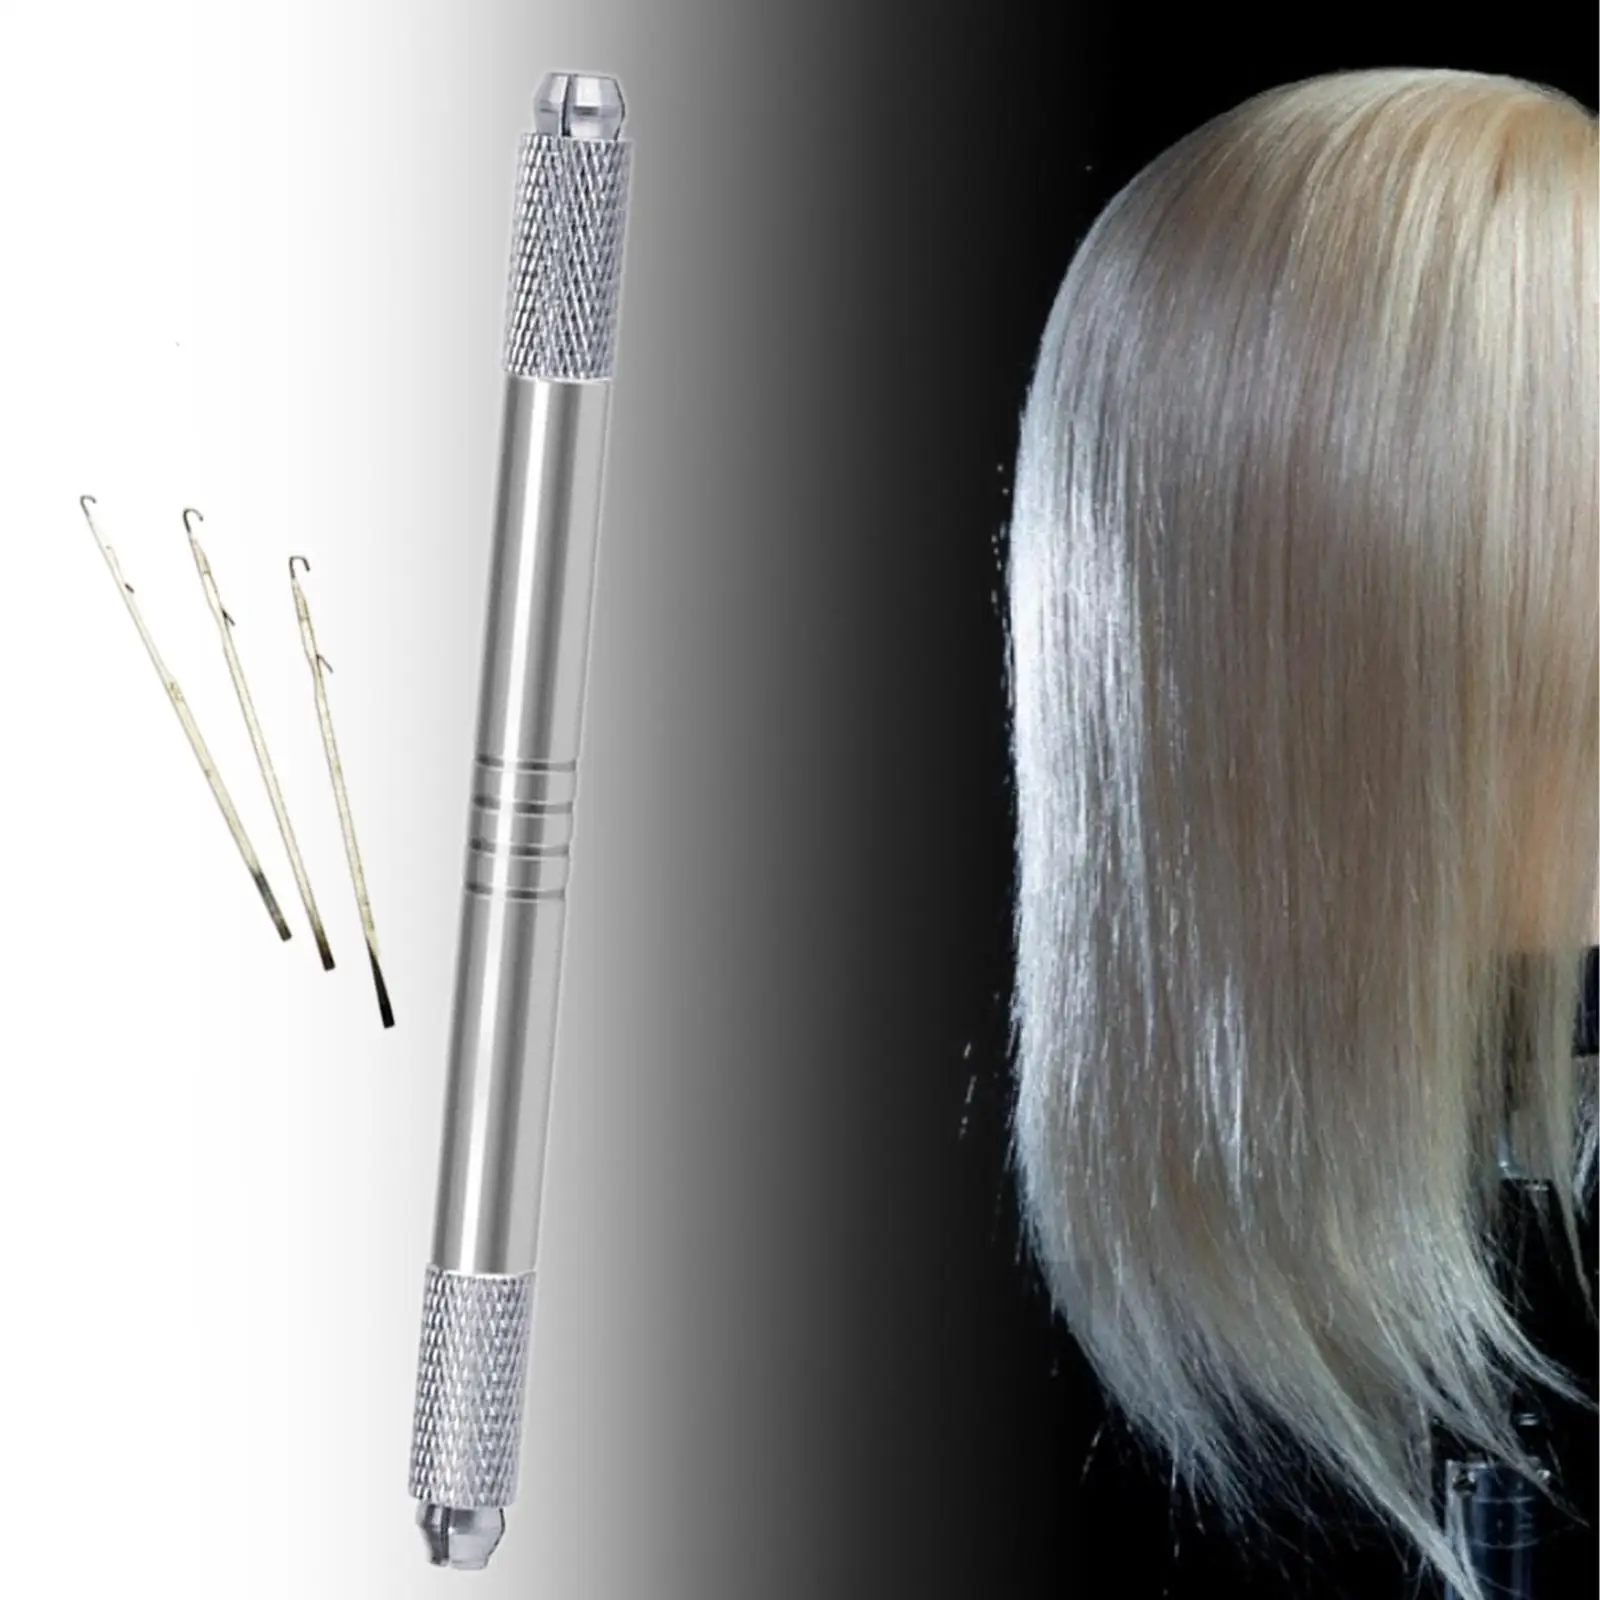 Hair Crochet Needles Set, Hair Extension Tool Aluminum Handle Holder, for Lace Wigs